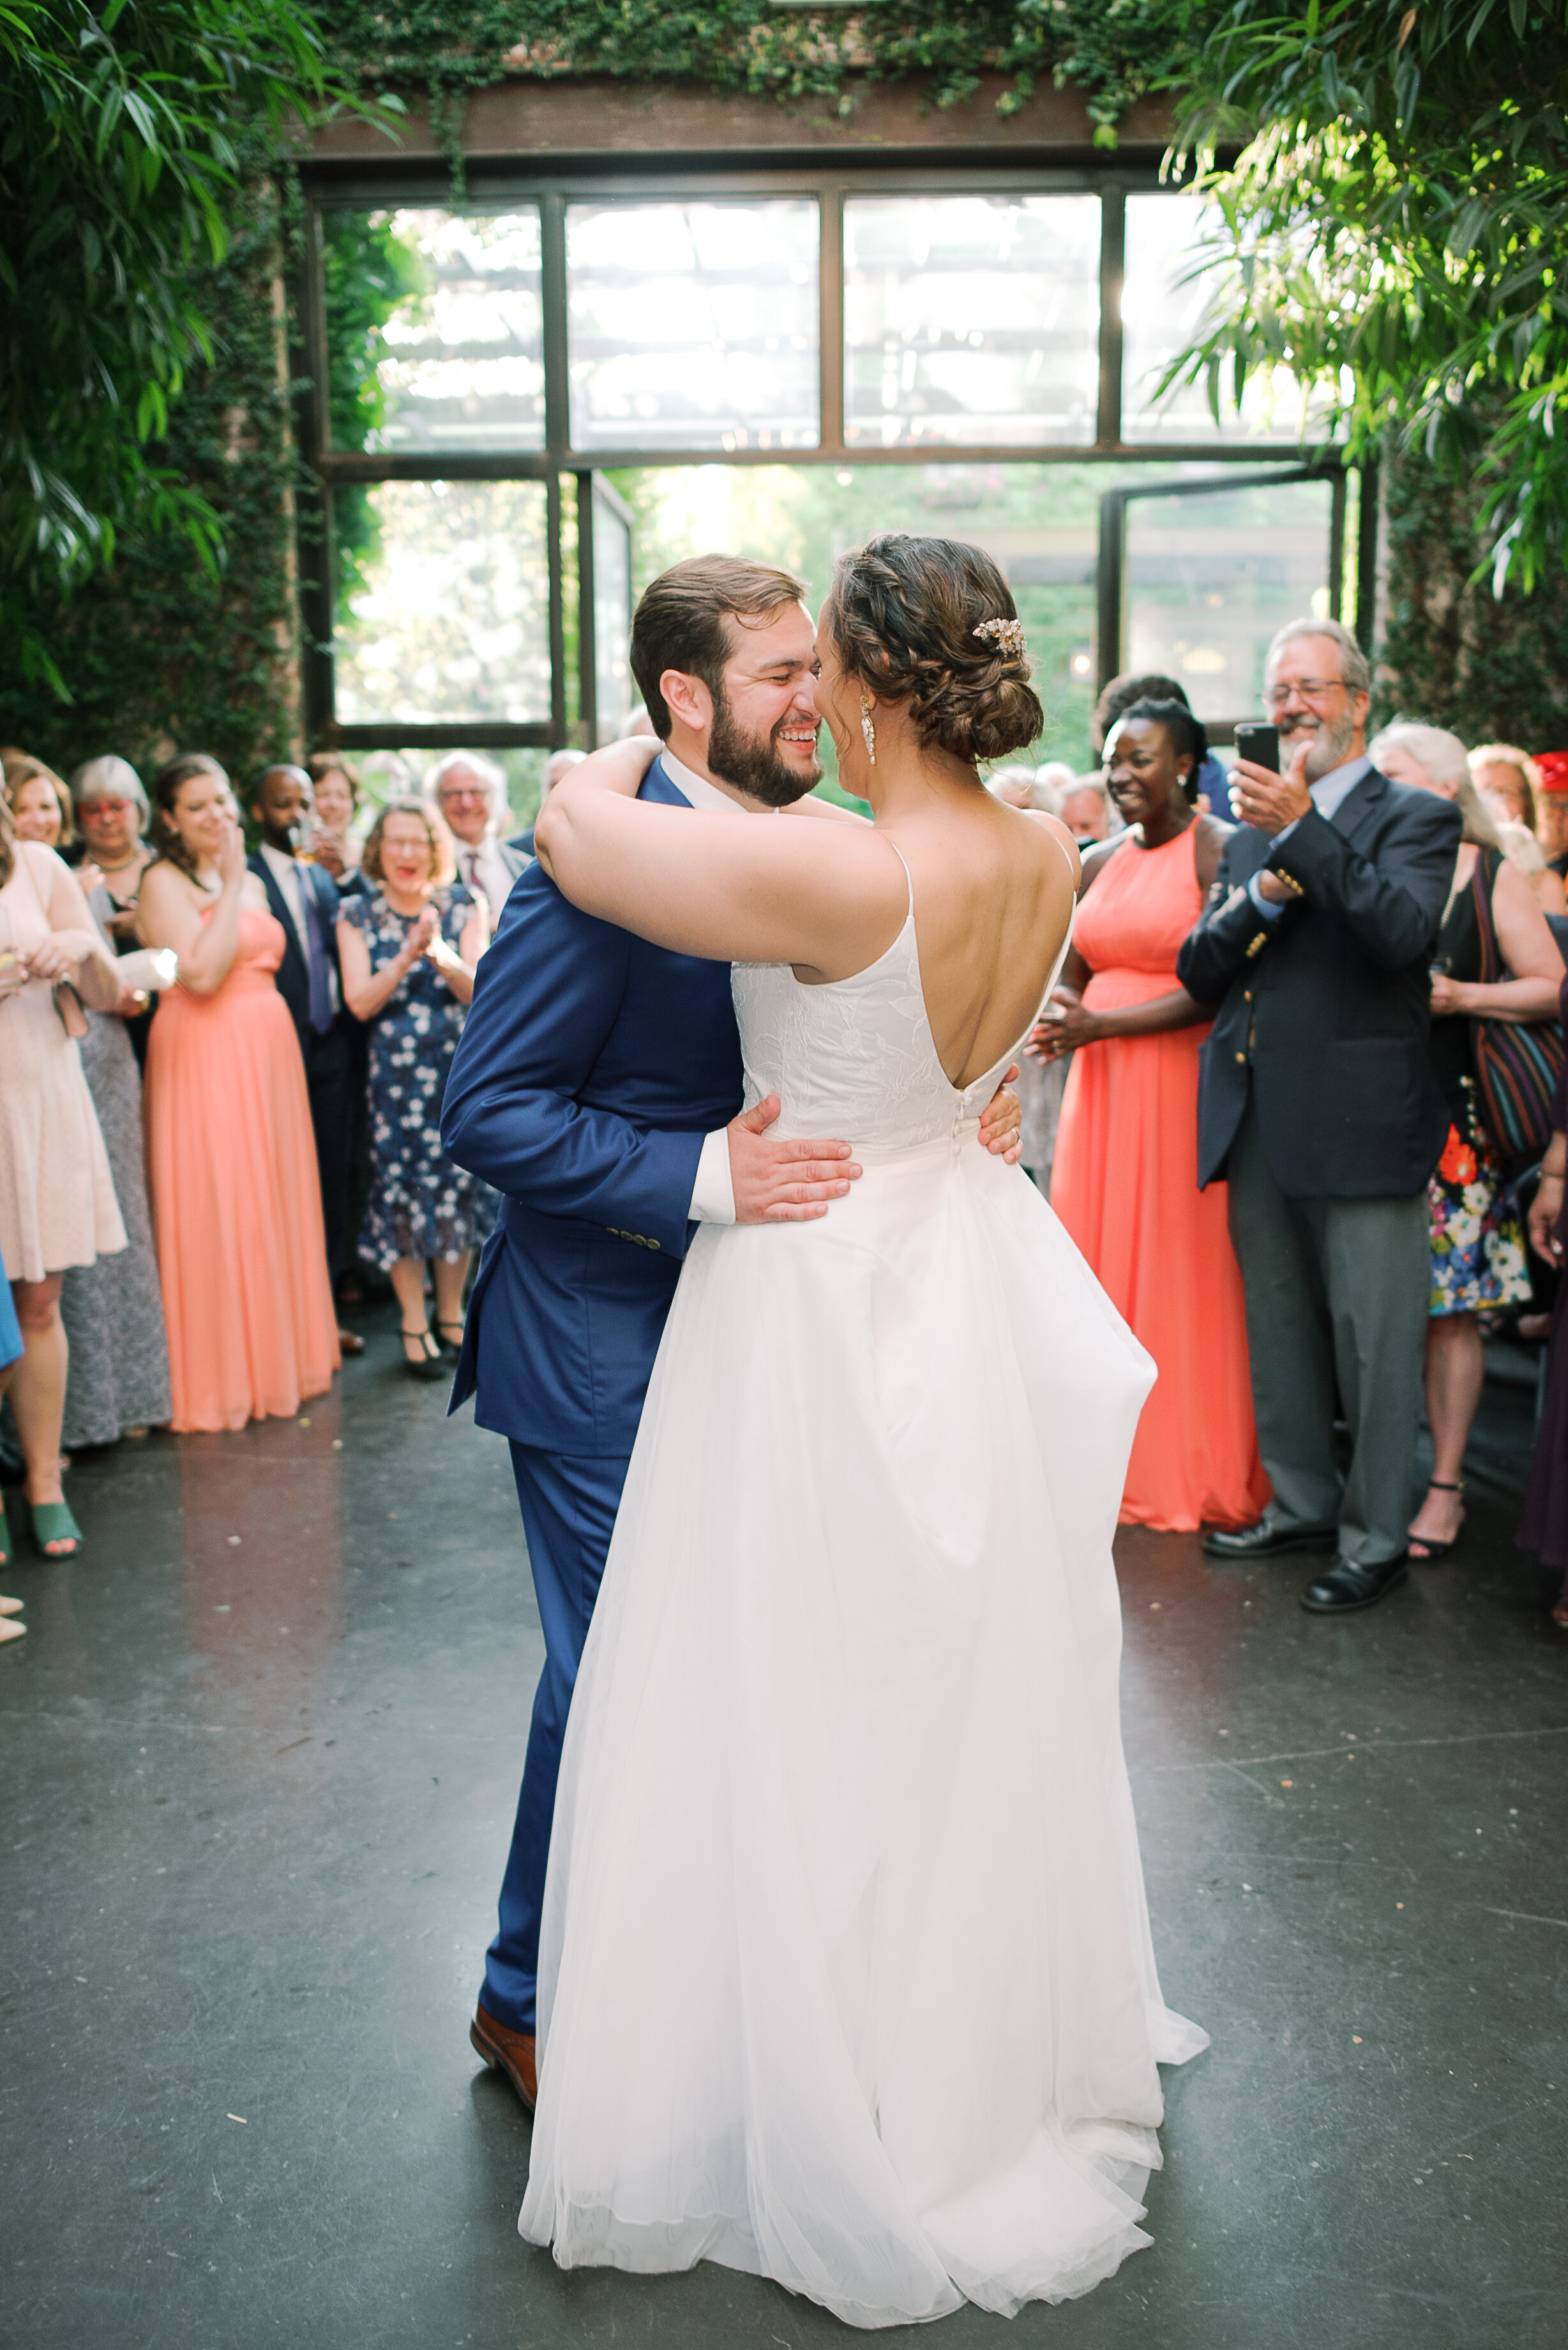 Bride and Groom First Dance inside the Greenhouse at The Foundry